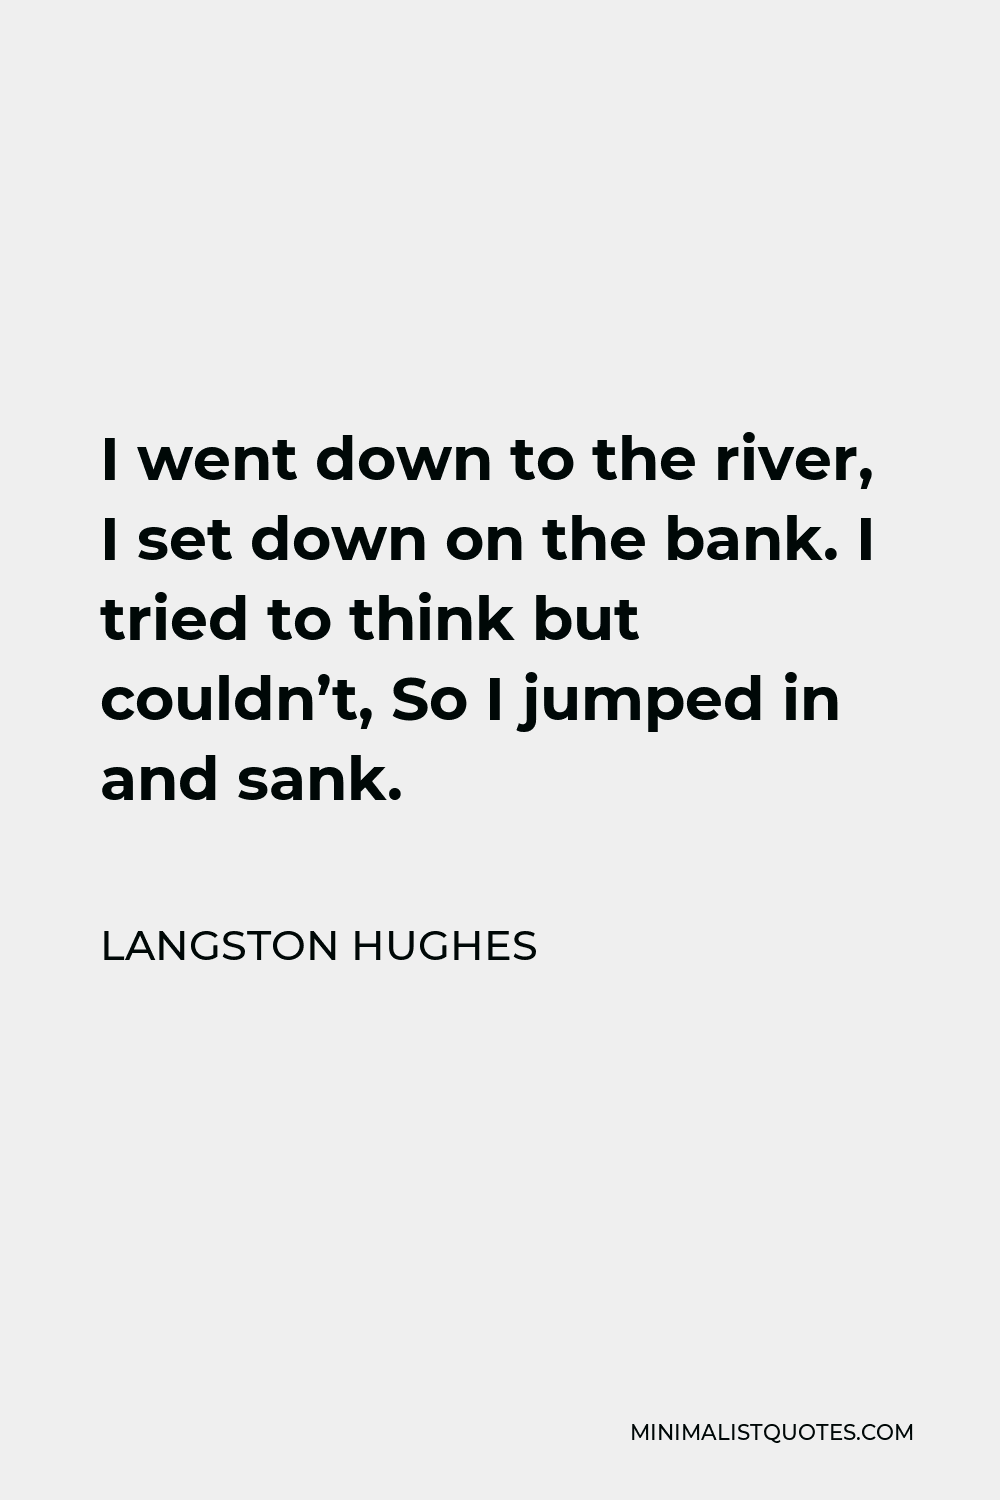 Langston Hughes Quote - I went down to the river, I set down on the bank. I tried to think but couldn’t, So I jumped in and sank.